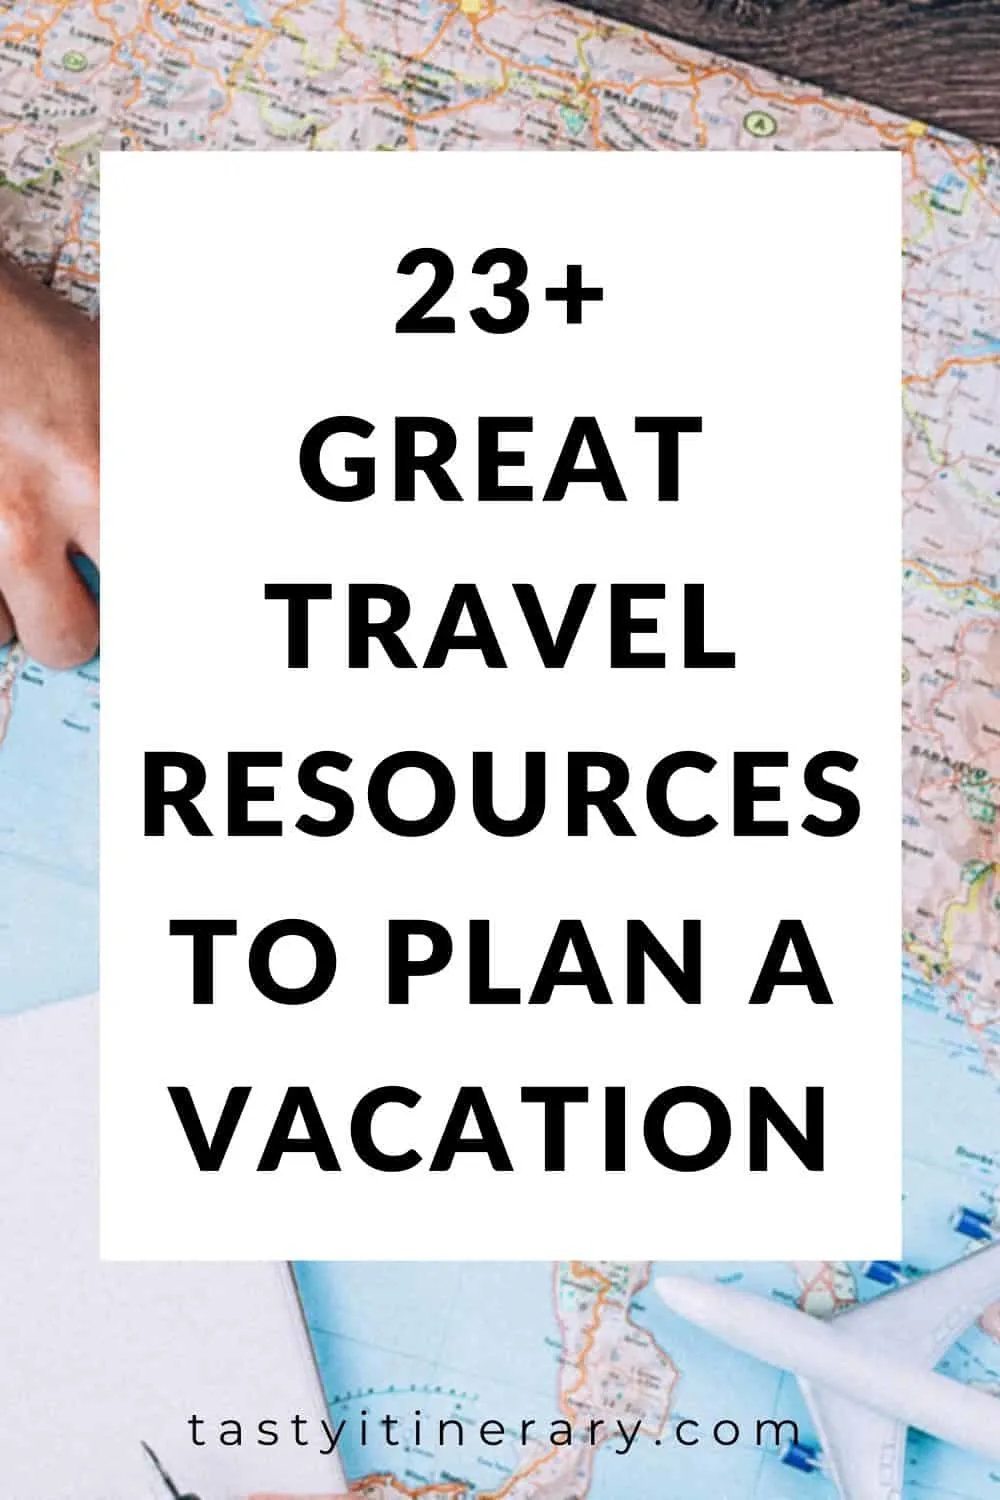 23+ Great Travel Resources to Plan a Vacation